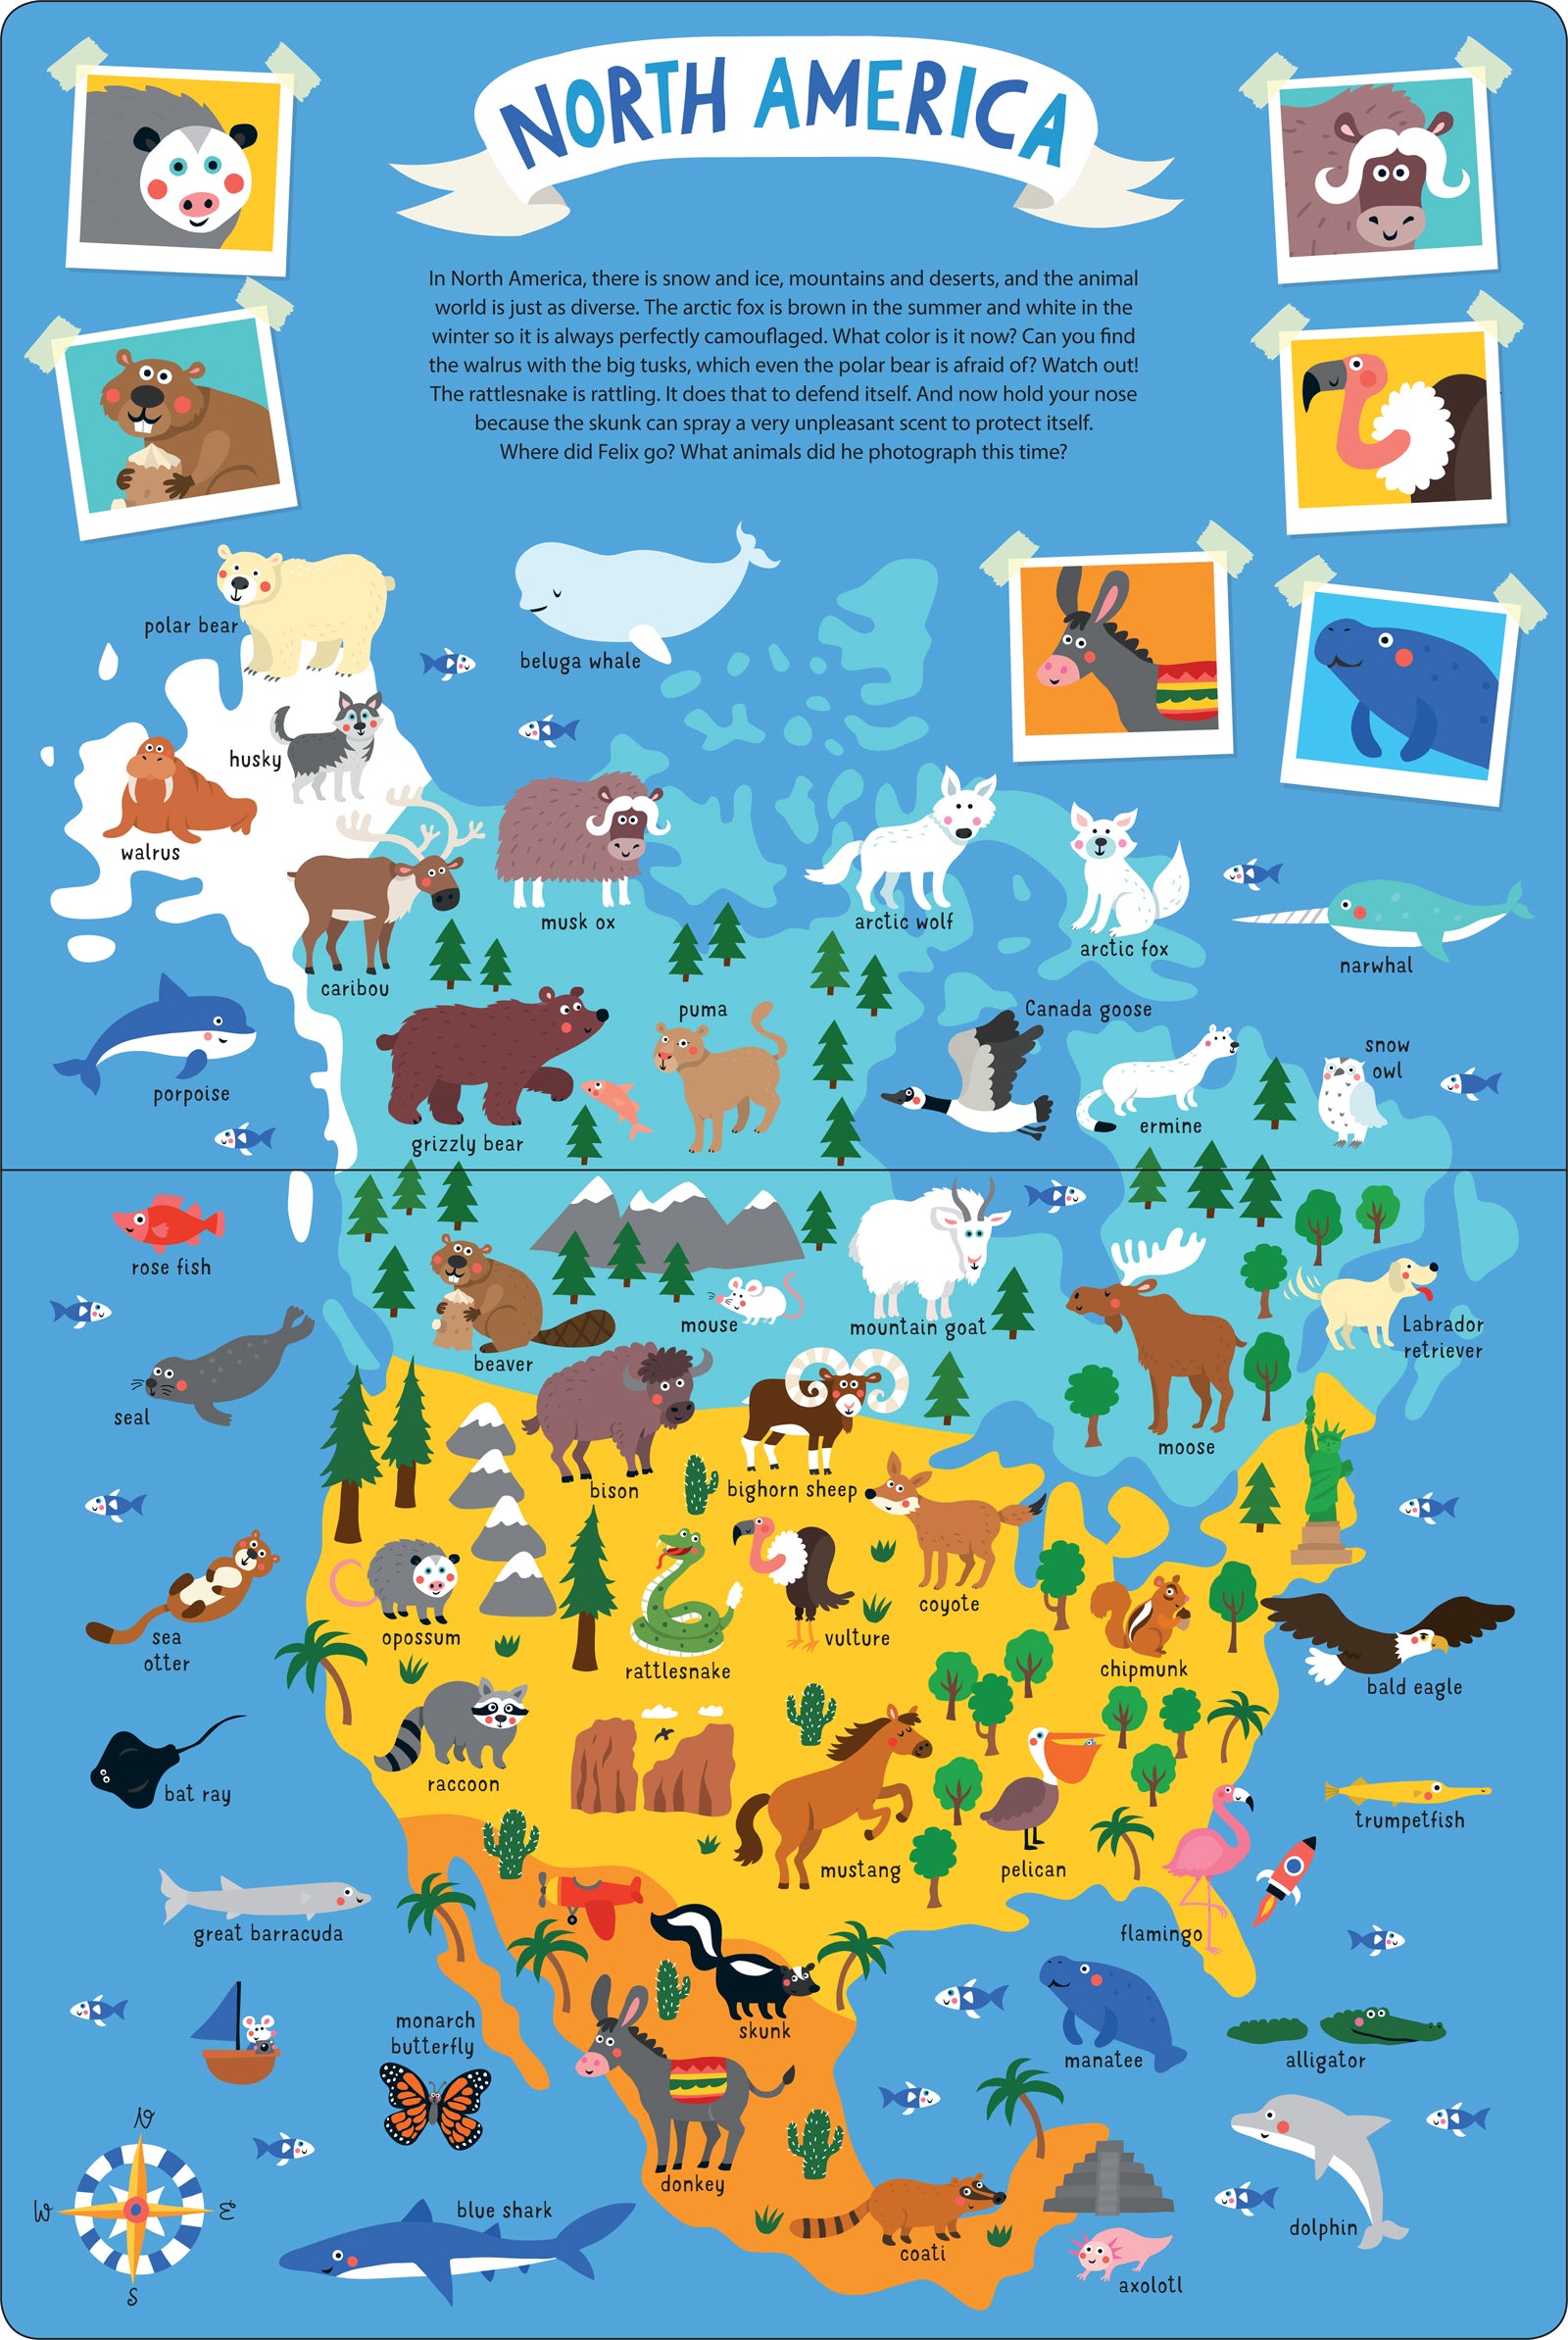 My Animal Atlas - 270 Amazing Animals and Where They Live    